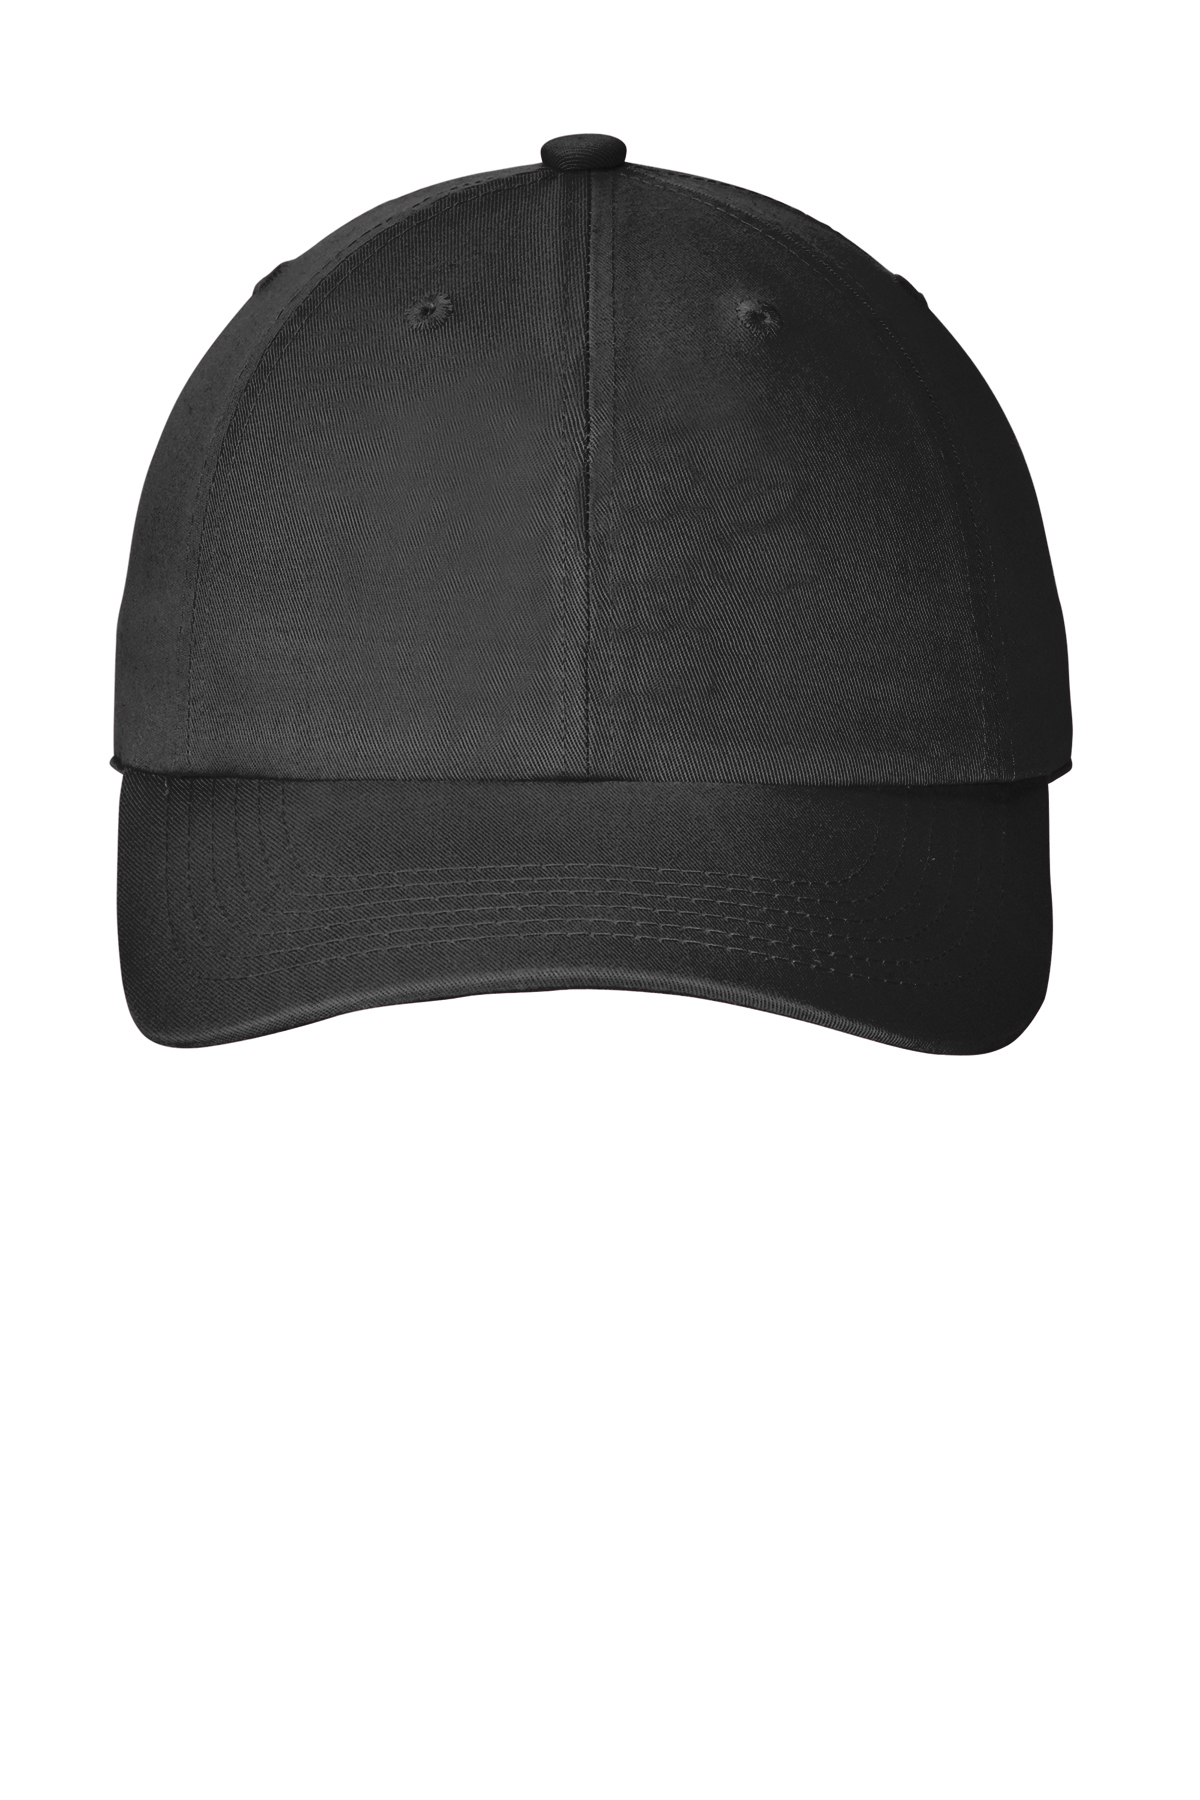 Port Authority Garment Washed Cap | Product | Company Casuals